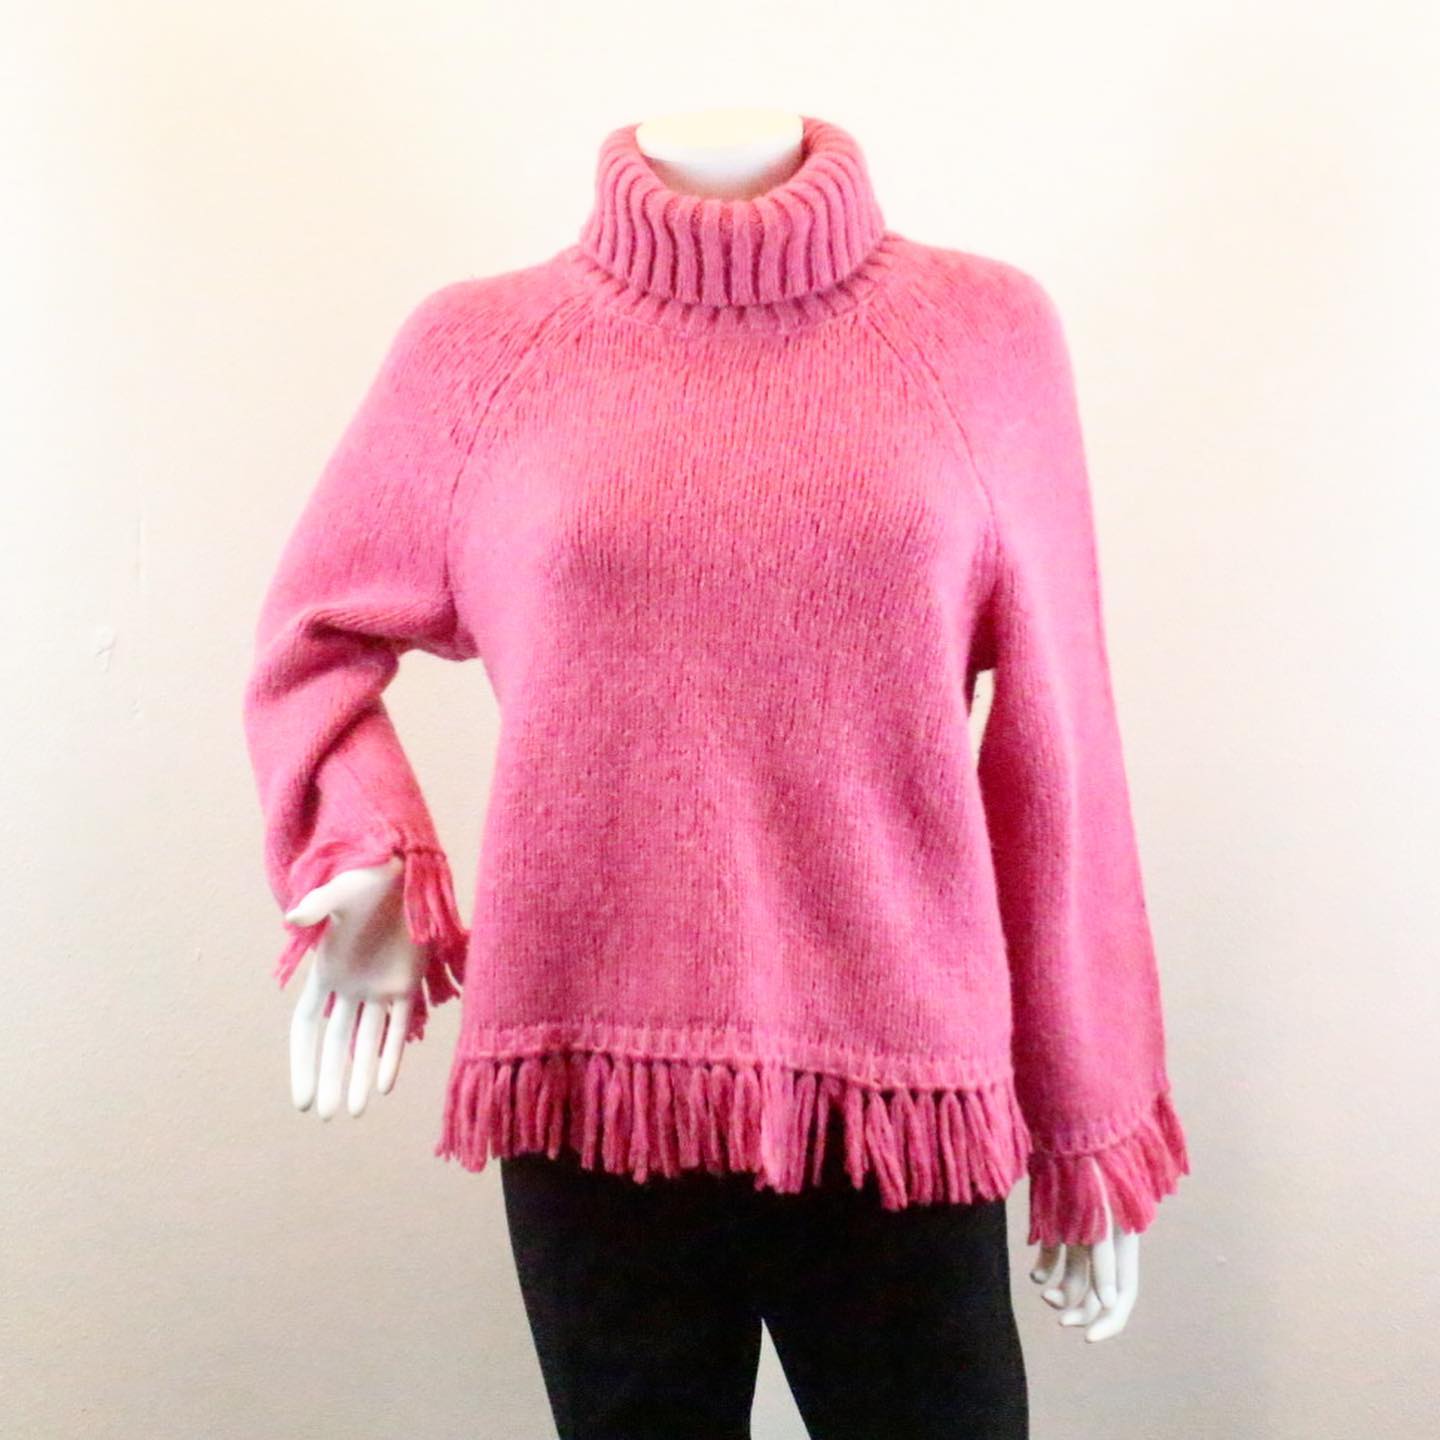 TORY BURCH Pink Long Sleeve Turtle Neck Sweater (Size Large) #27395